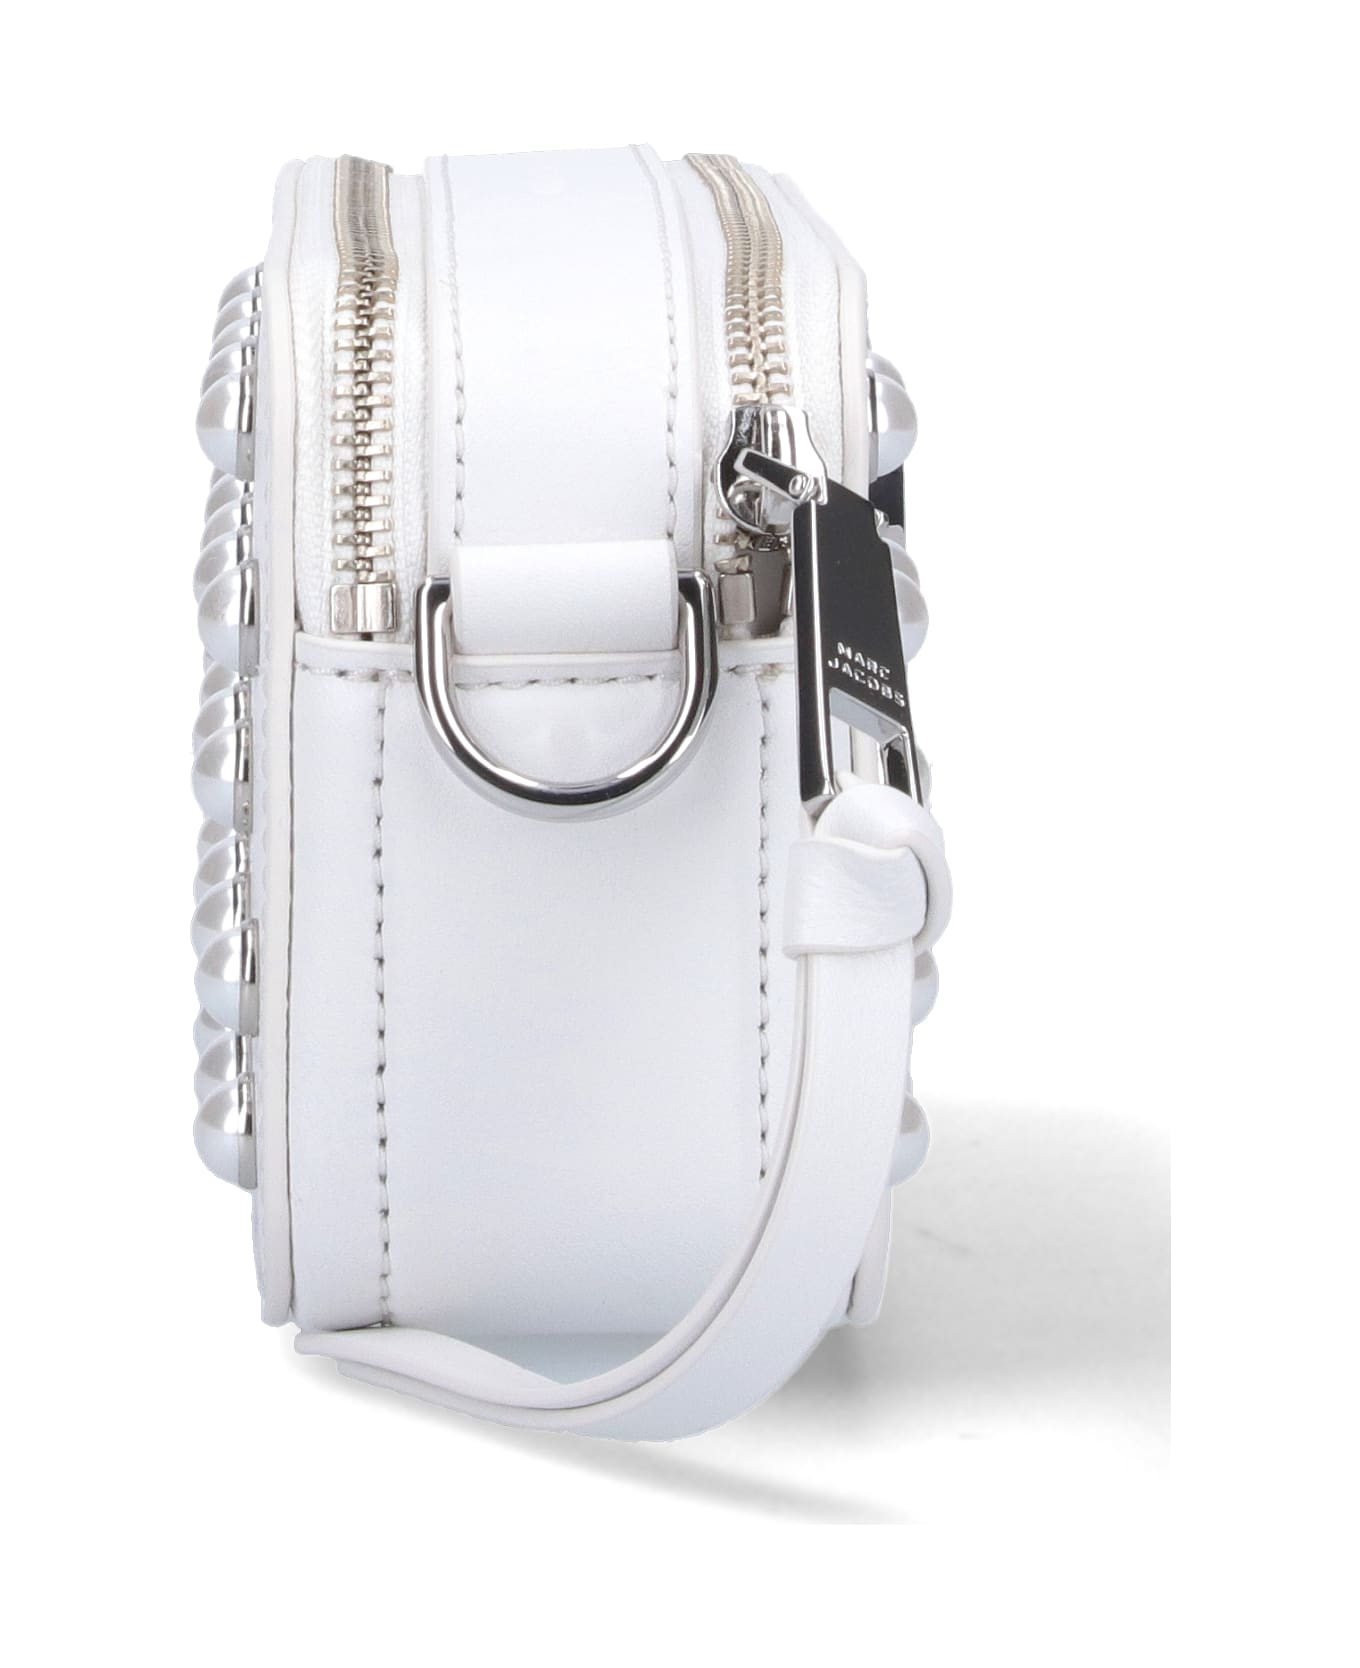 Marc Jacobs The Pearl Snapshot Crossbody Bag - White